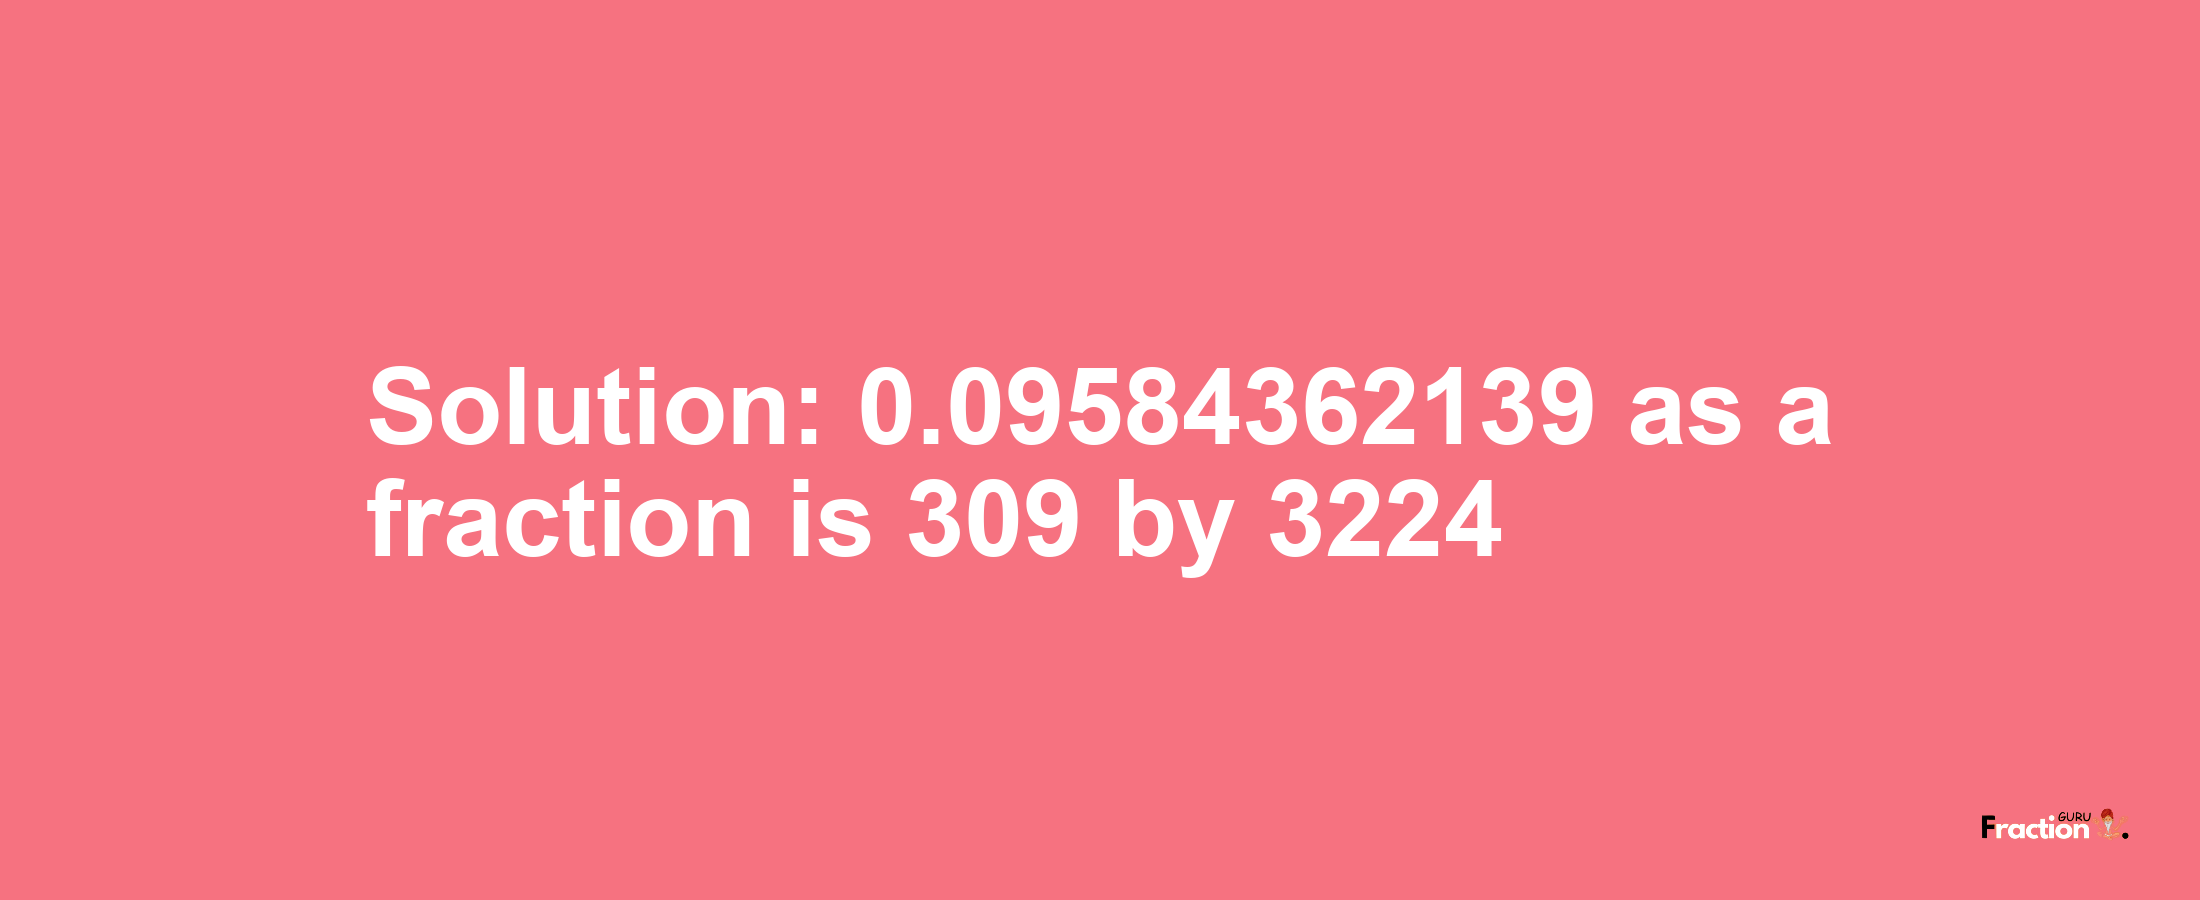 Solution:0.09584362139 as a fraction is 309/3224